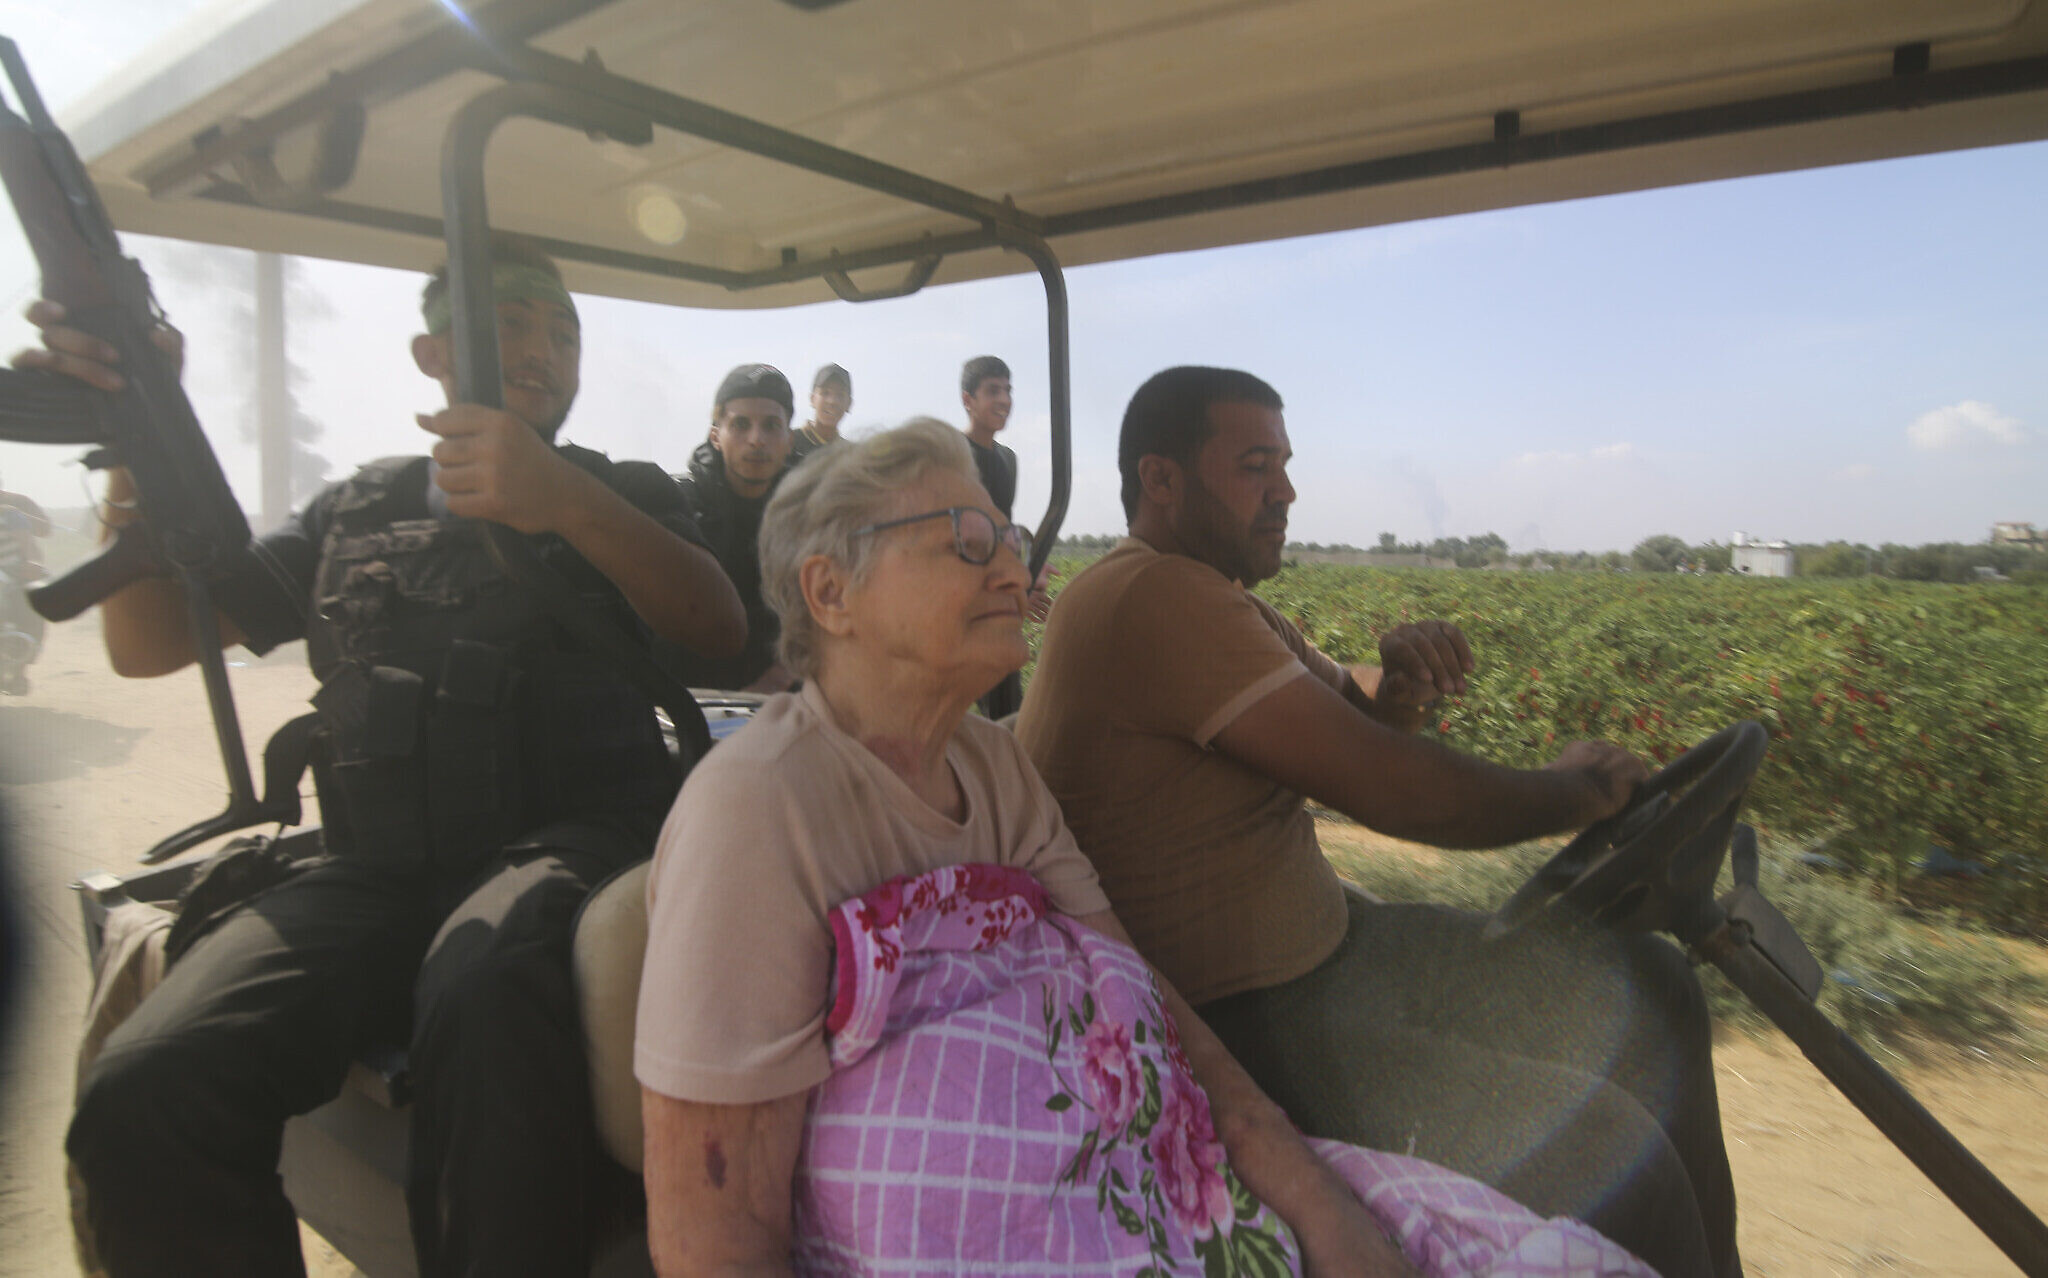 RELEASED: Yaffa Adar, 85: Video on a golf cart among 1st evidence of hostages | The Times of Israel